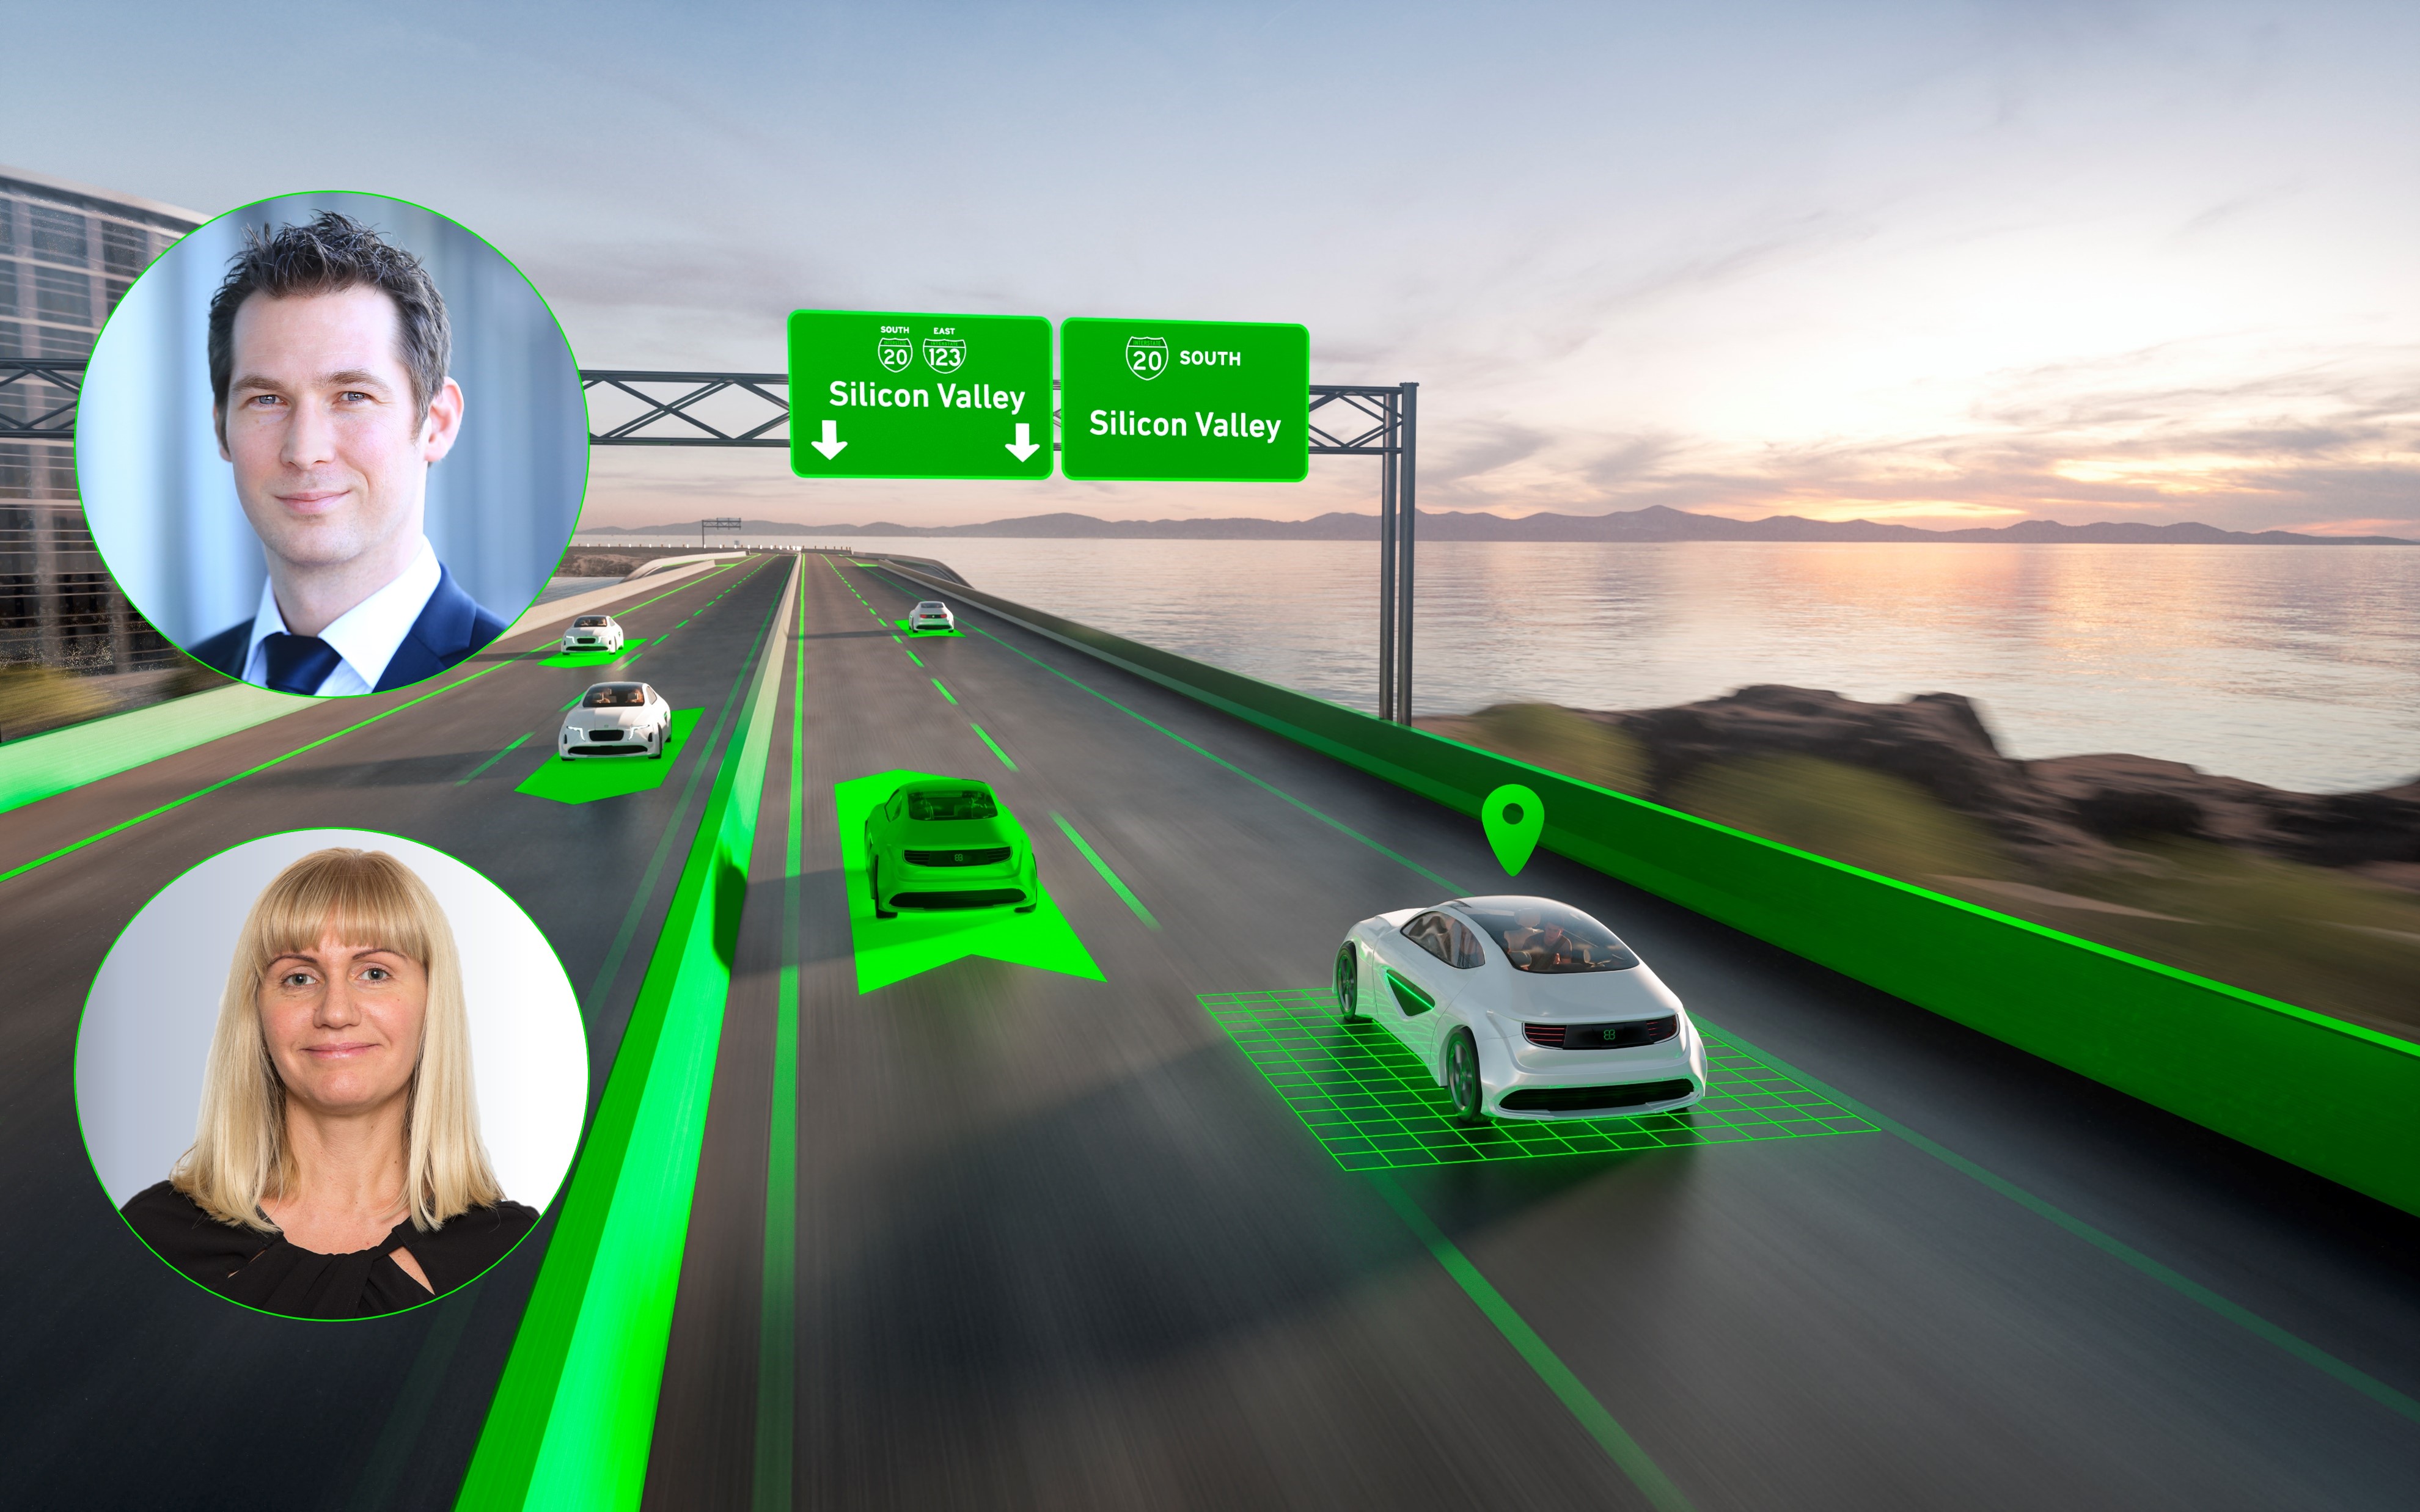 Mastering precise vehicle positioning for autonomous driving applications